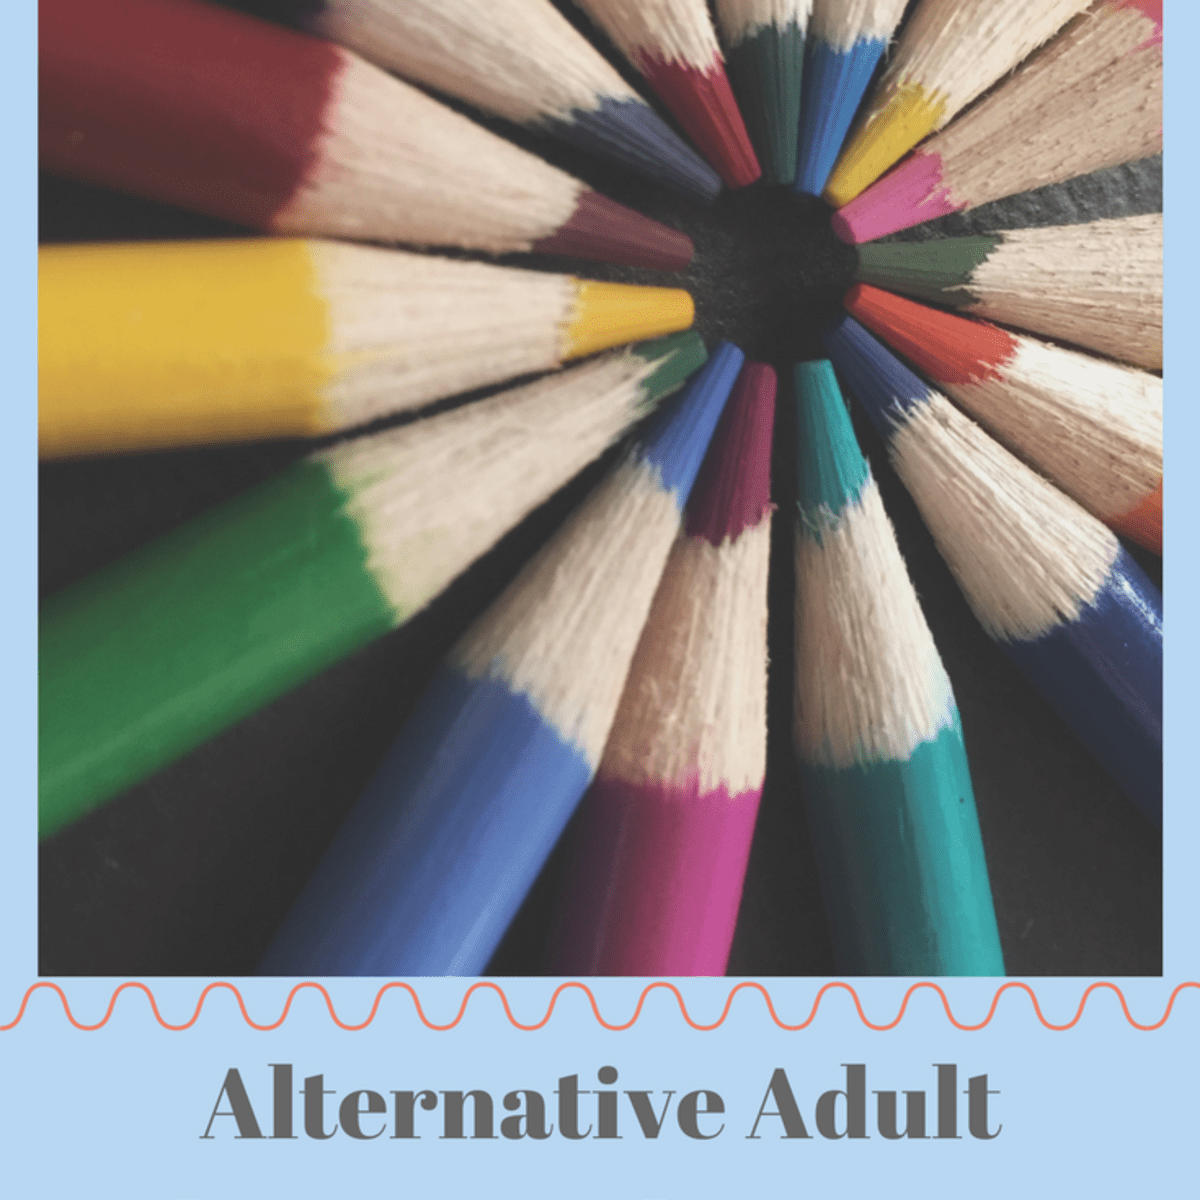 7 Adult Coloring Book Alternatives You May Not Know About - FeltMagnet